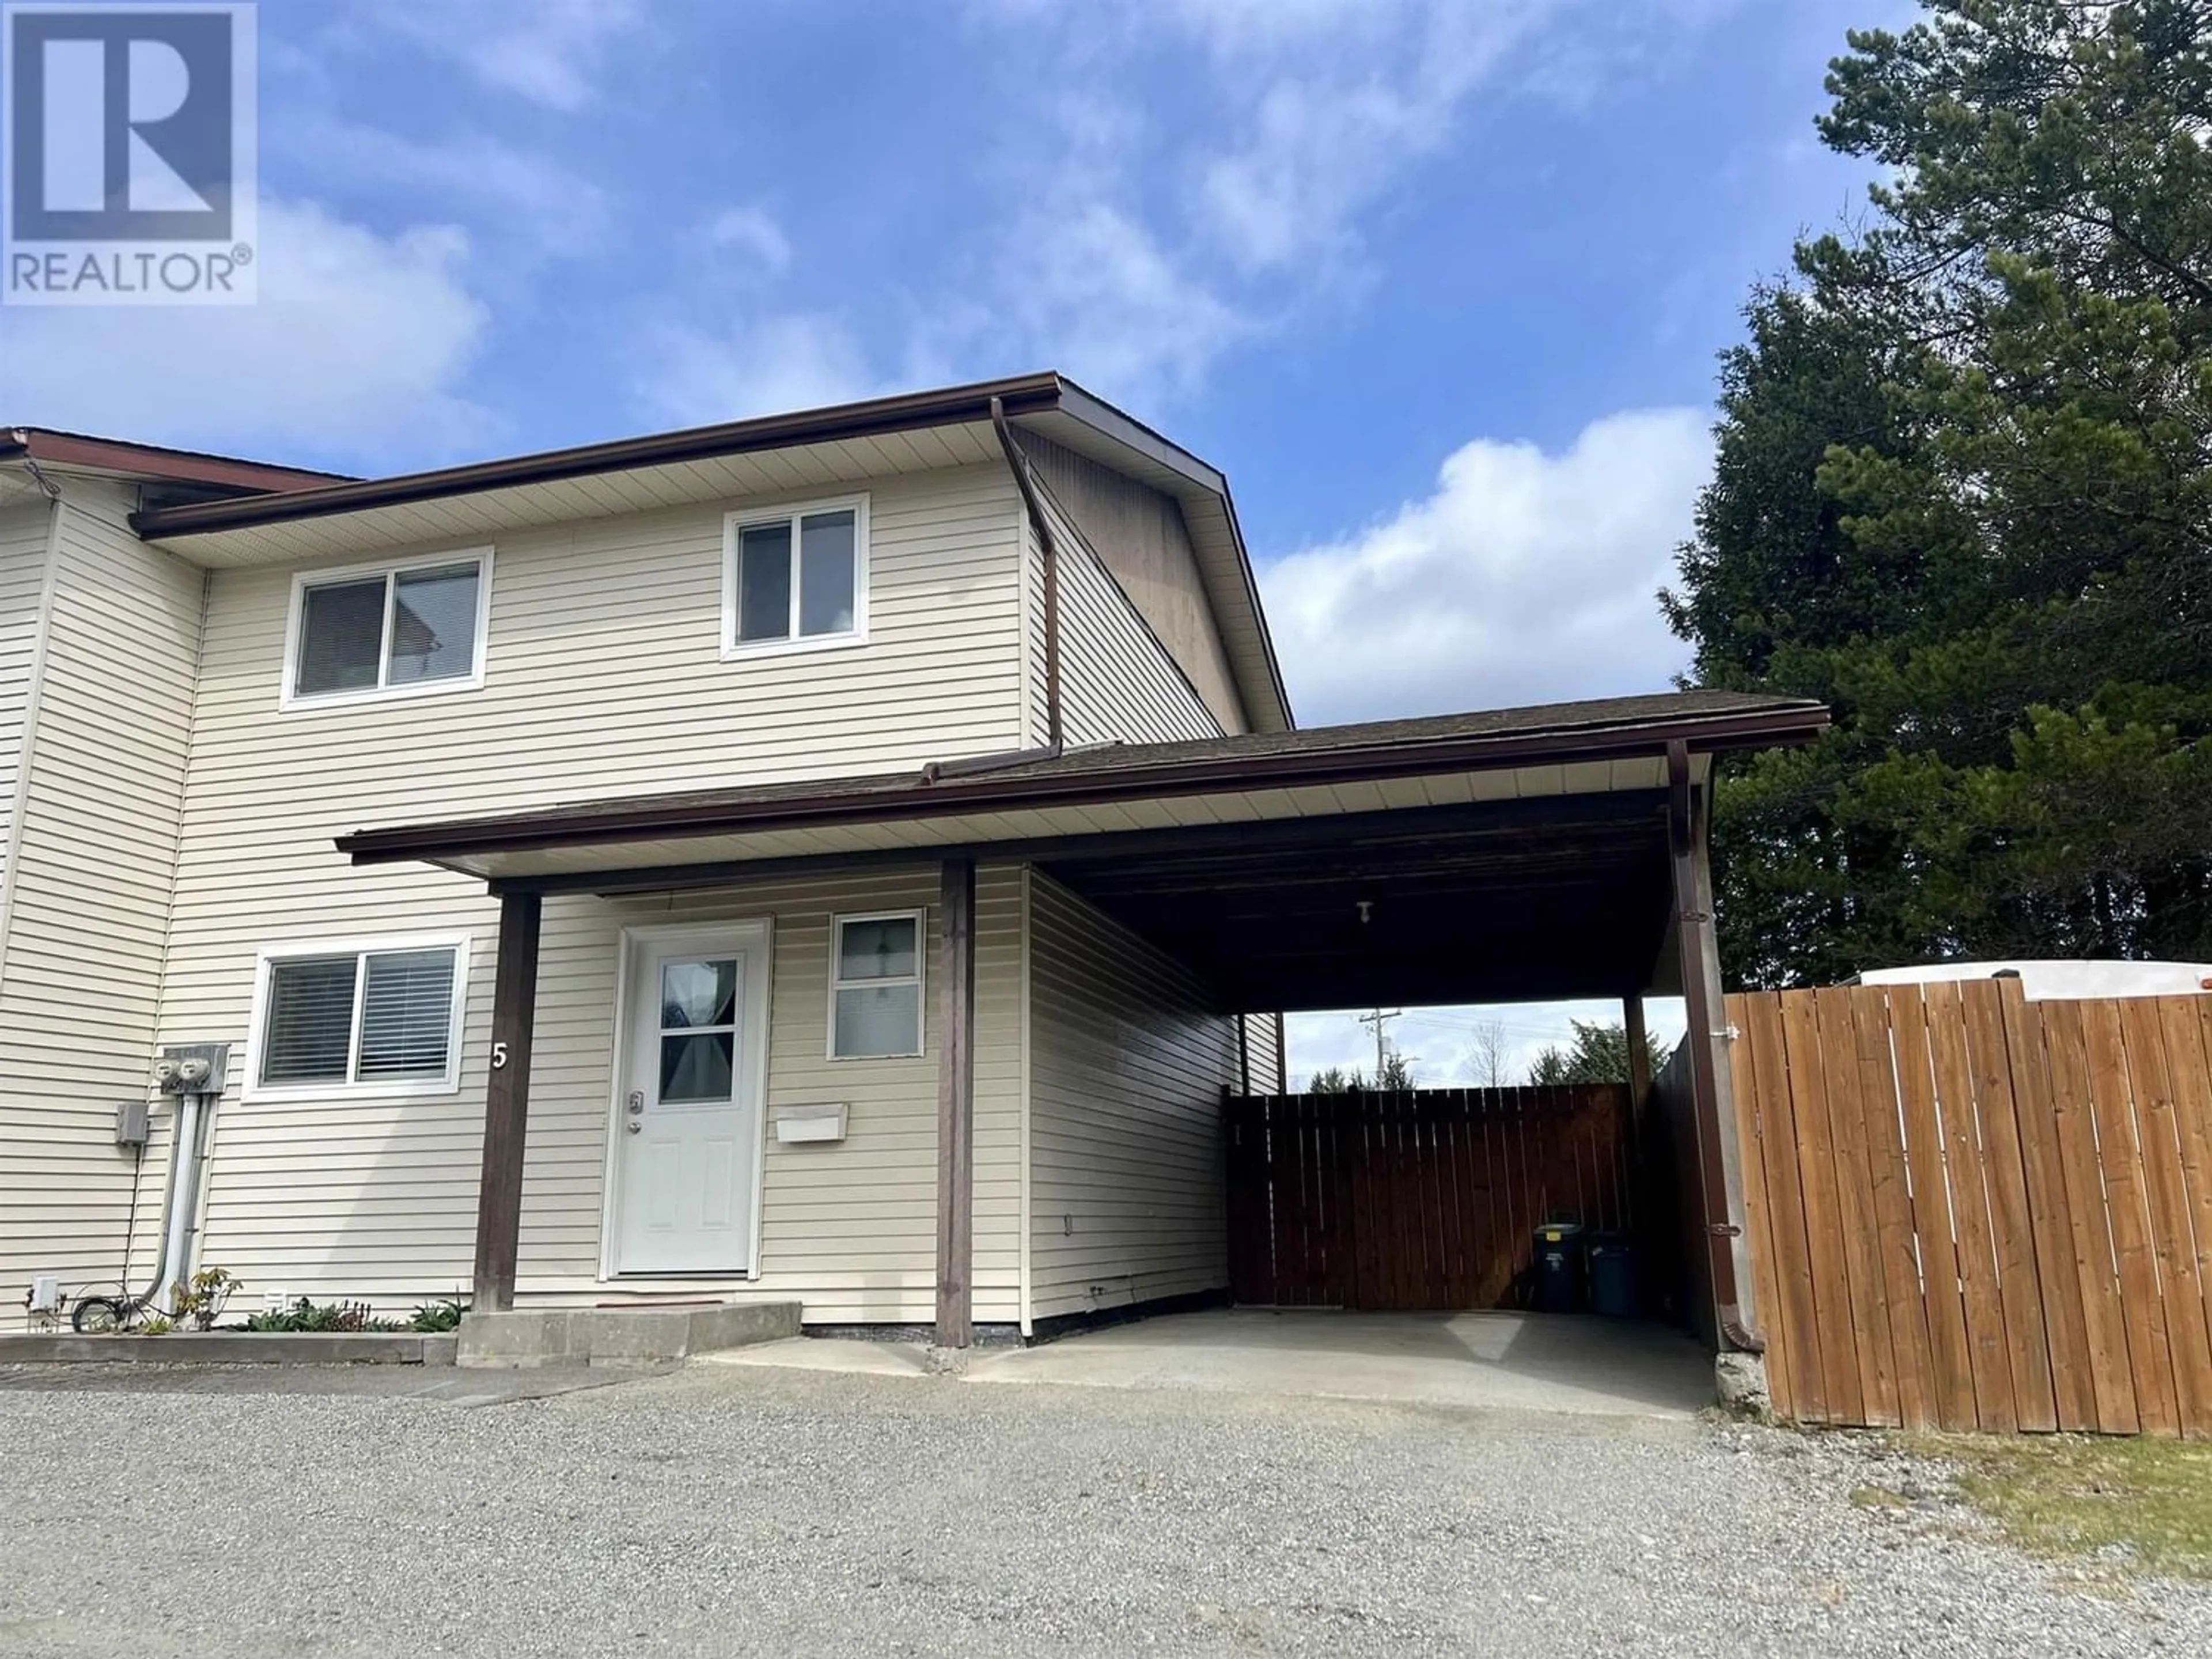 Frontside or backside of a home for 5-10 CREED STREET, Kitimat British Columbia V8C2P3